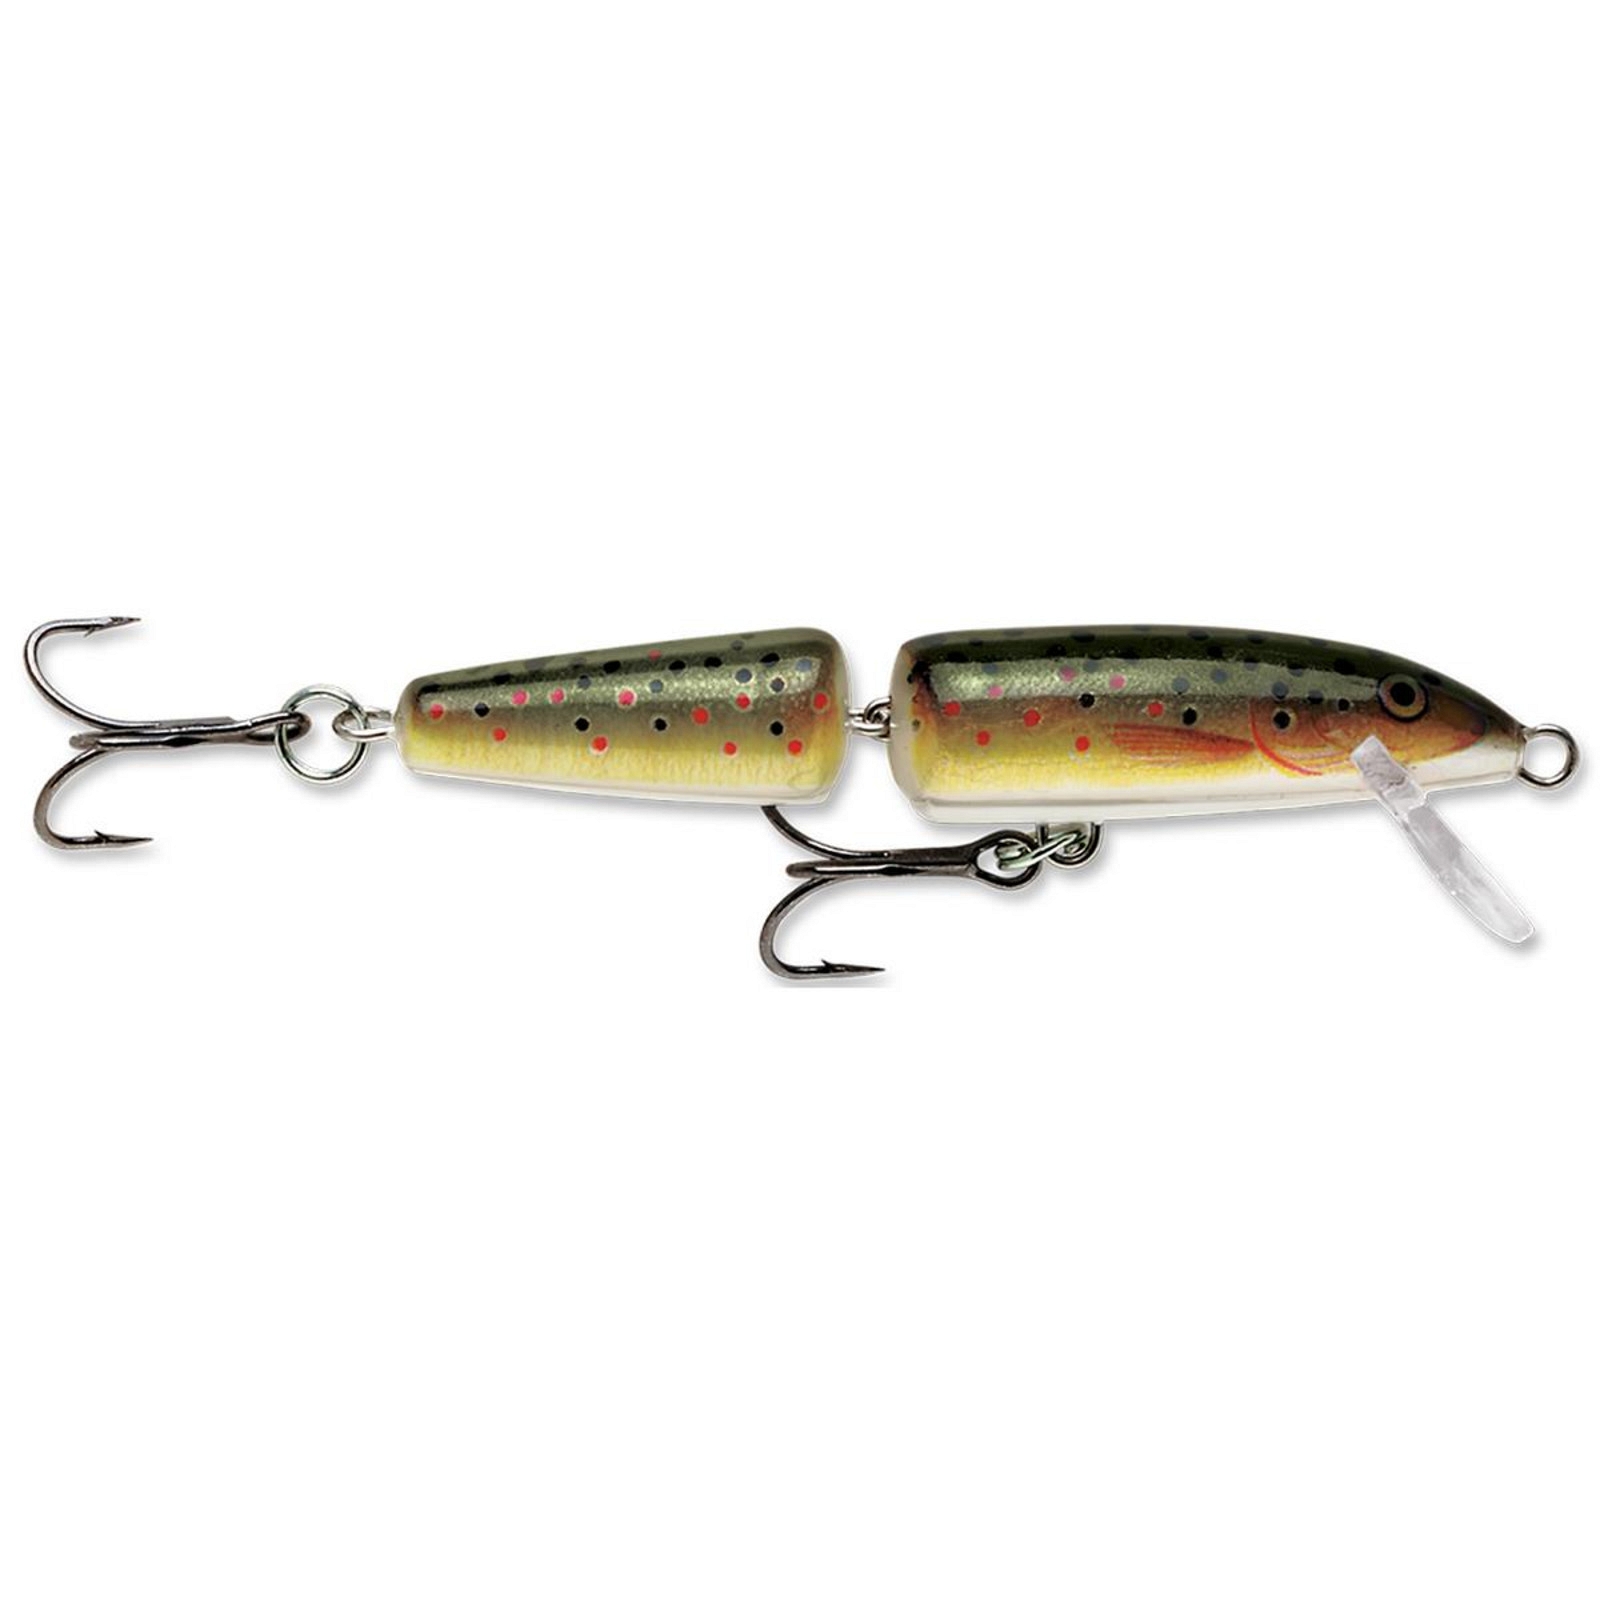 Rapala Floating Jointed J-9 S Silver 3 1/2 Jerkbait 1/4oz. Fishing Lure  Finland